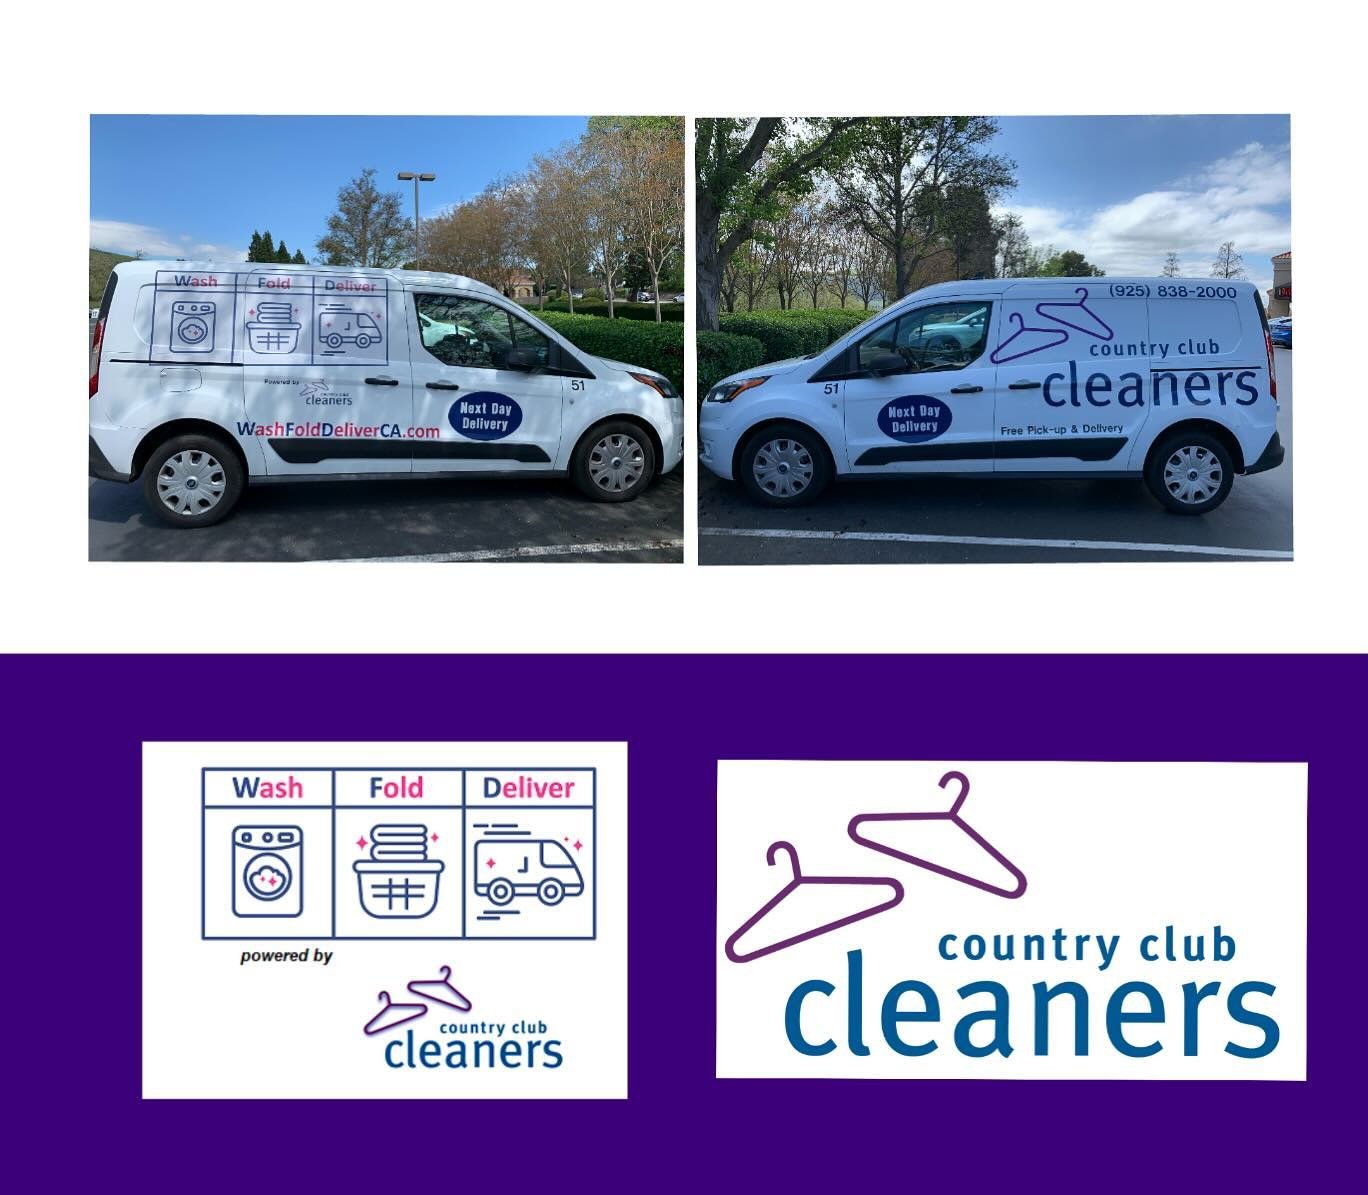 One of our new transits. 

@washfolddeliver on one side and @countryclubcleaners on the other!